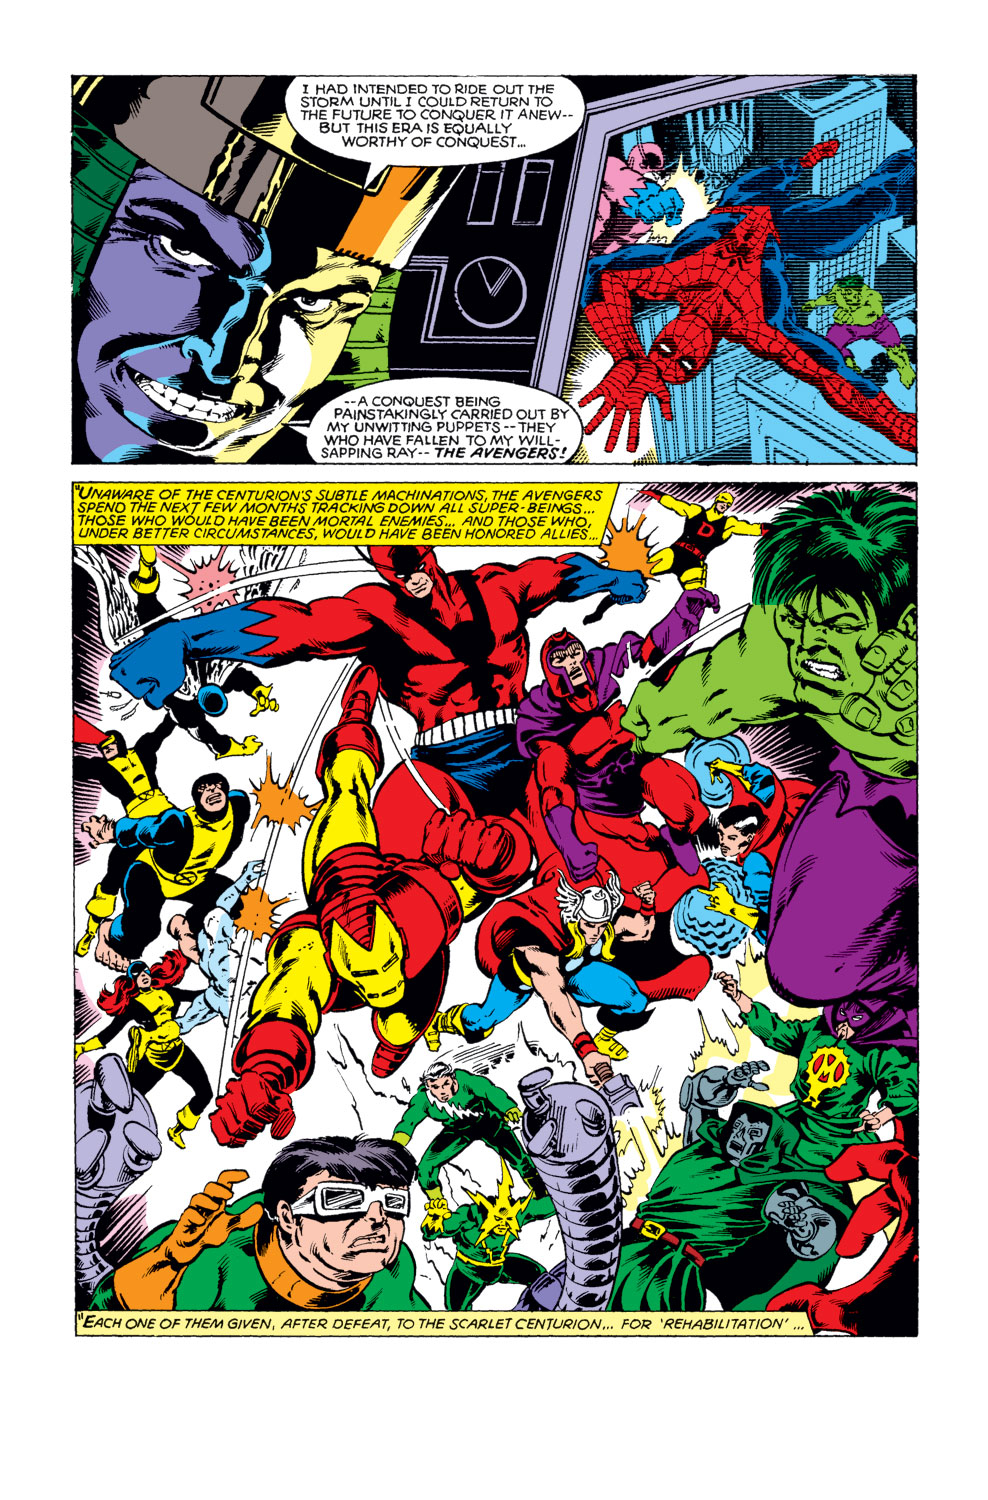 What If? (1977) issue 29 - The Avengers defeated everybody - Page 7